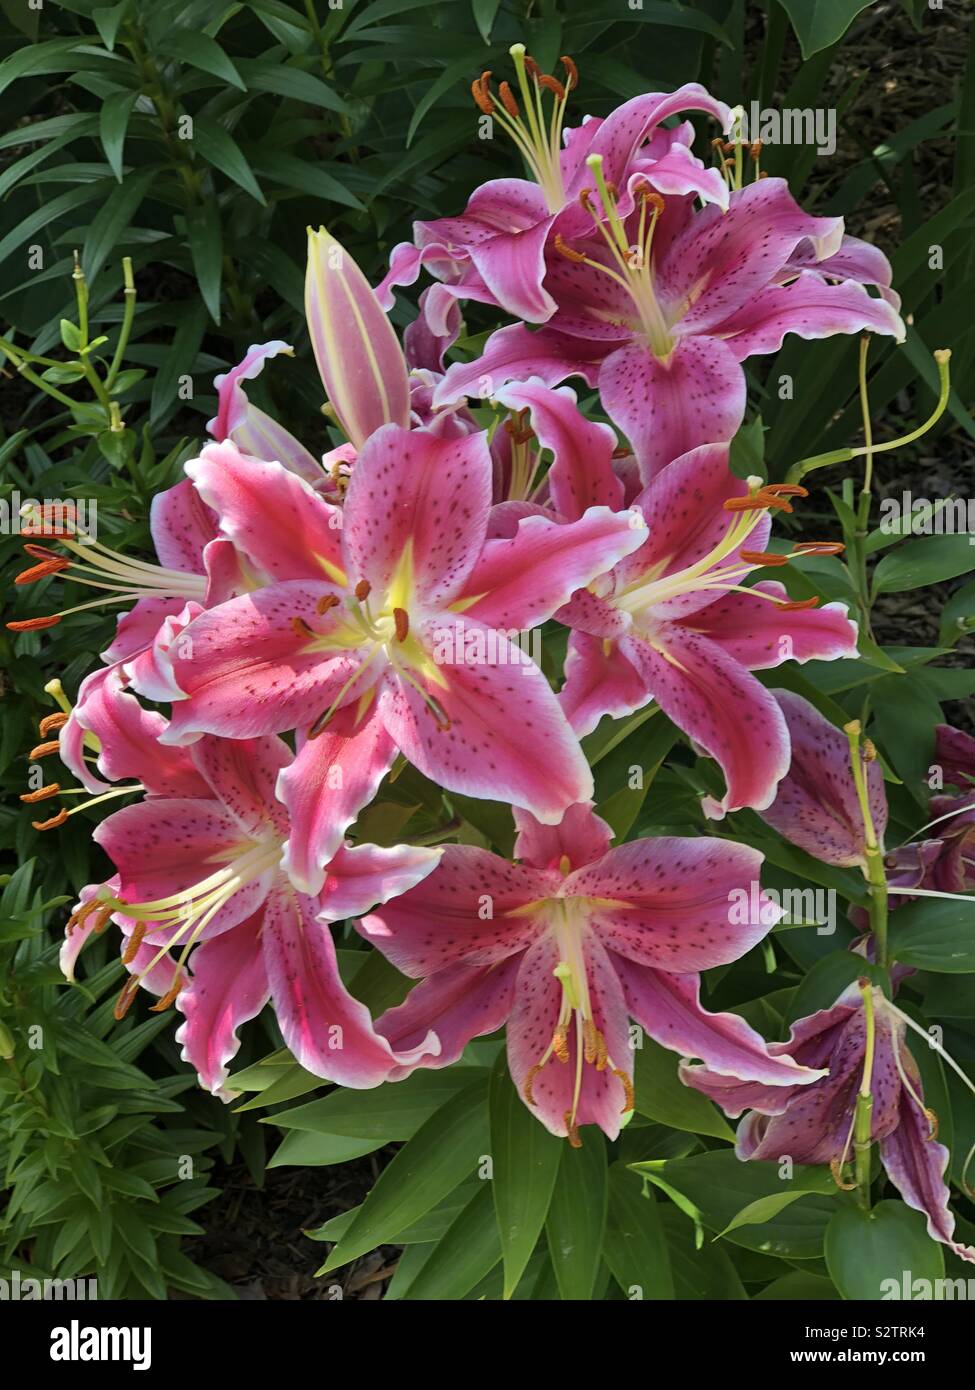 Bright bunch of pink lilies in full bloom Stock Photo